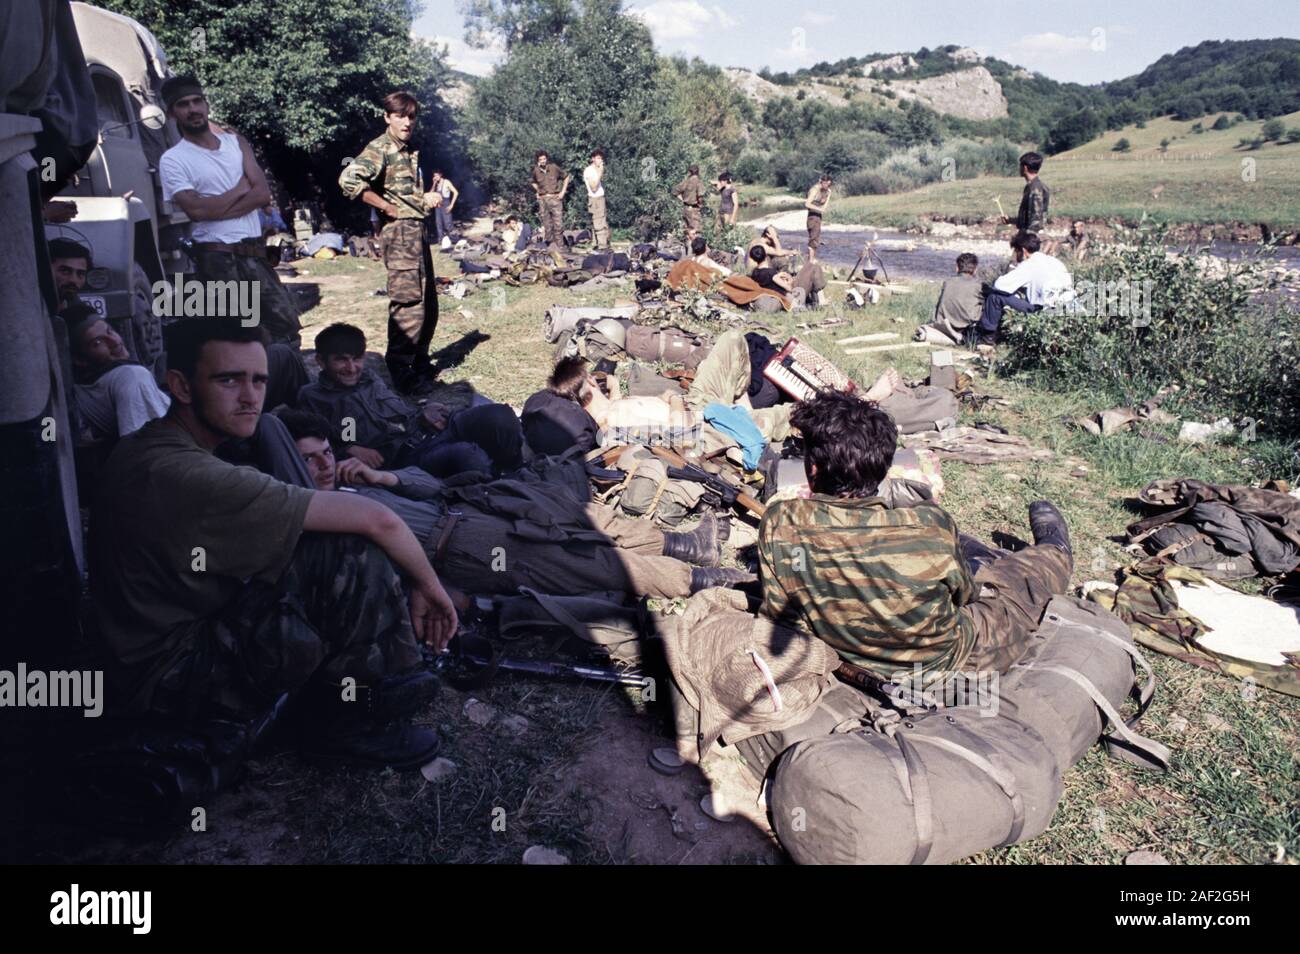 13th August 1993 During the war in Bosnia: BSA (Bosnian-Serb) soldiers relax in the hot sun on Bjelašnica mountain after intense fighting with ARBiH forces. Stock Photo